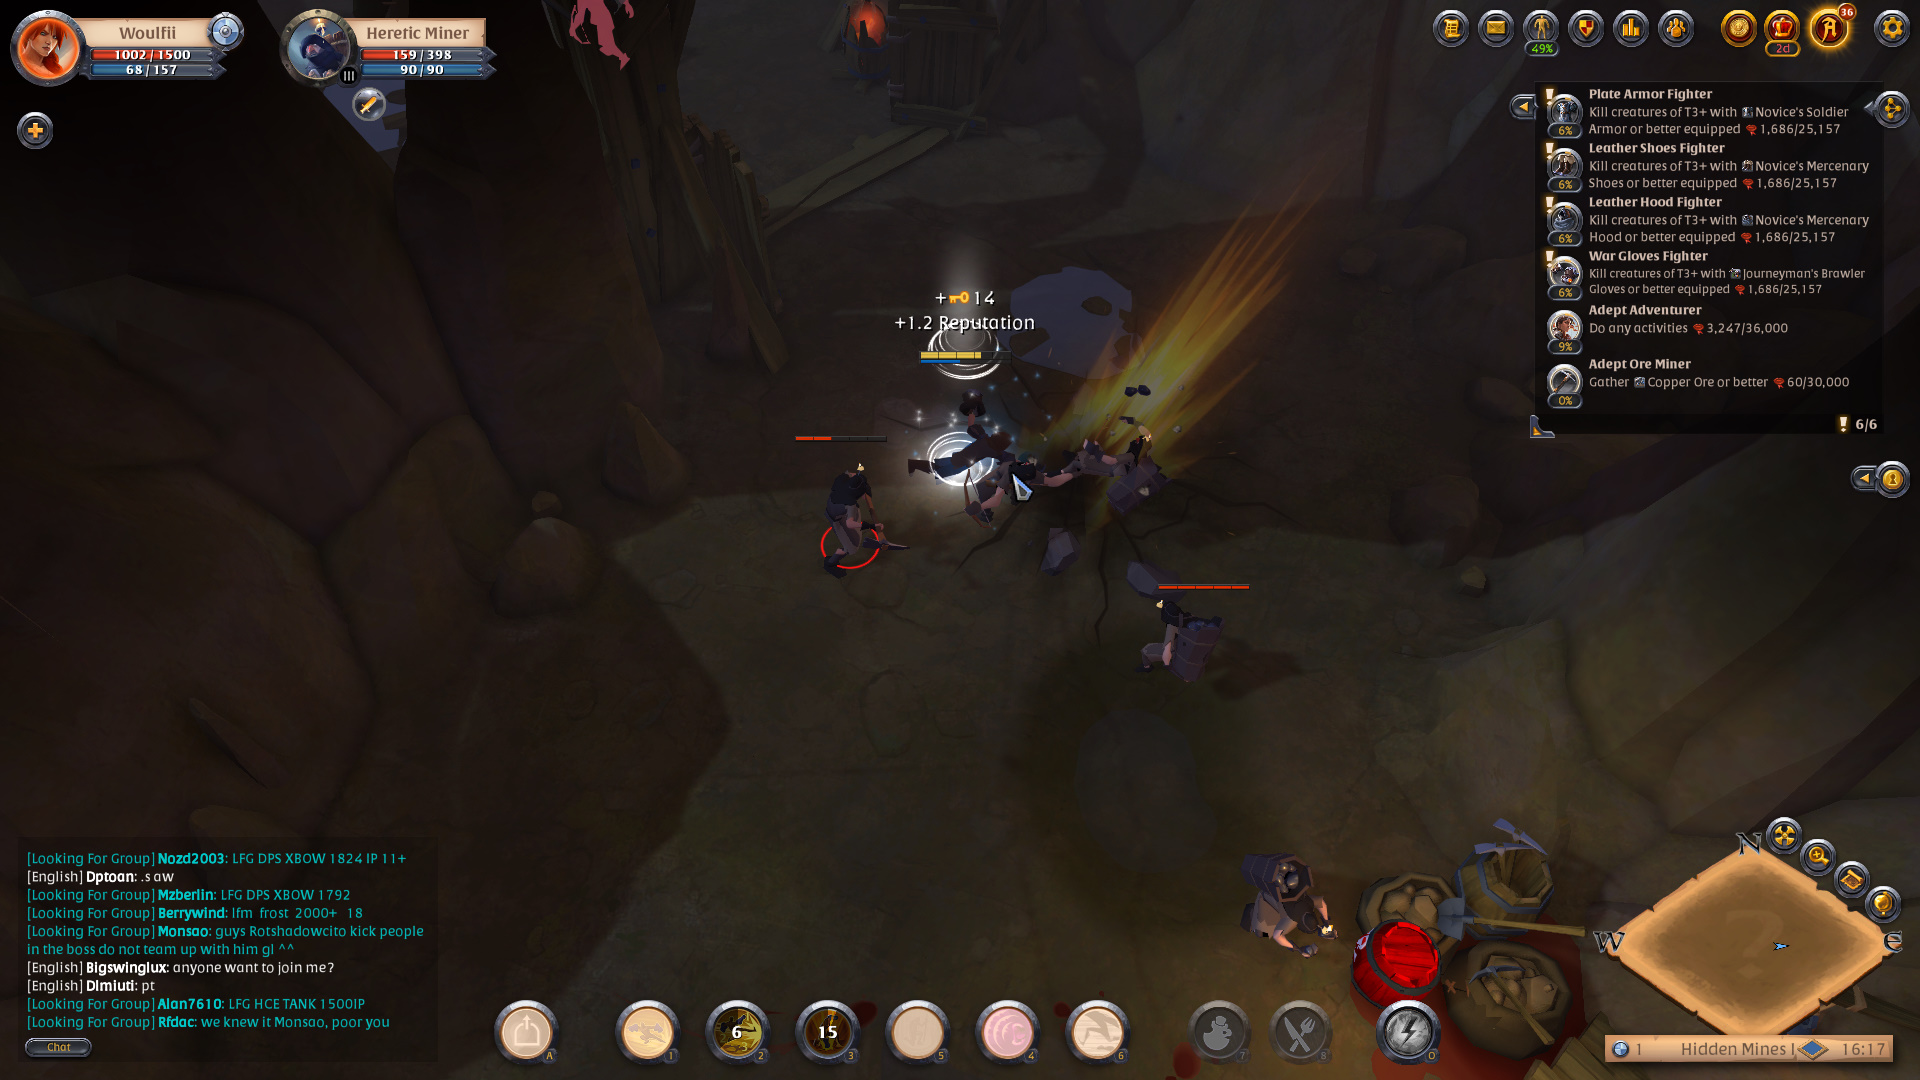 Beginner's Guide to Albion Online - 14 Tips to Help You Get Started